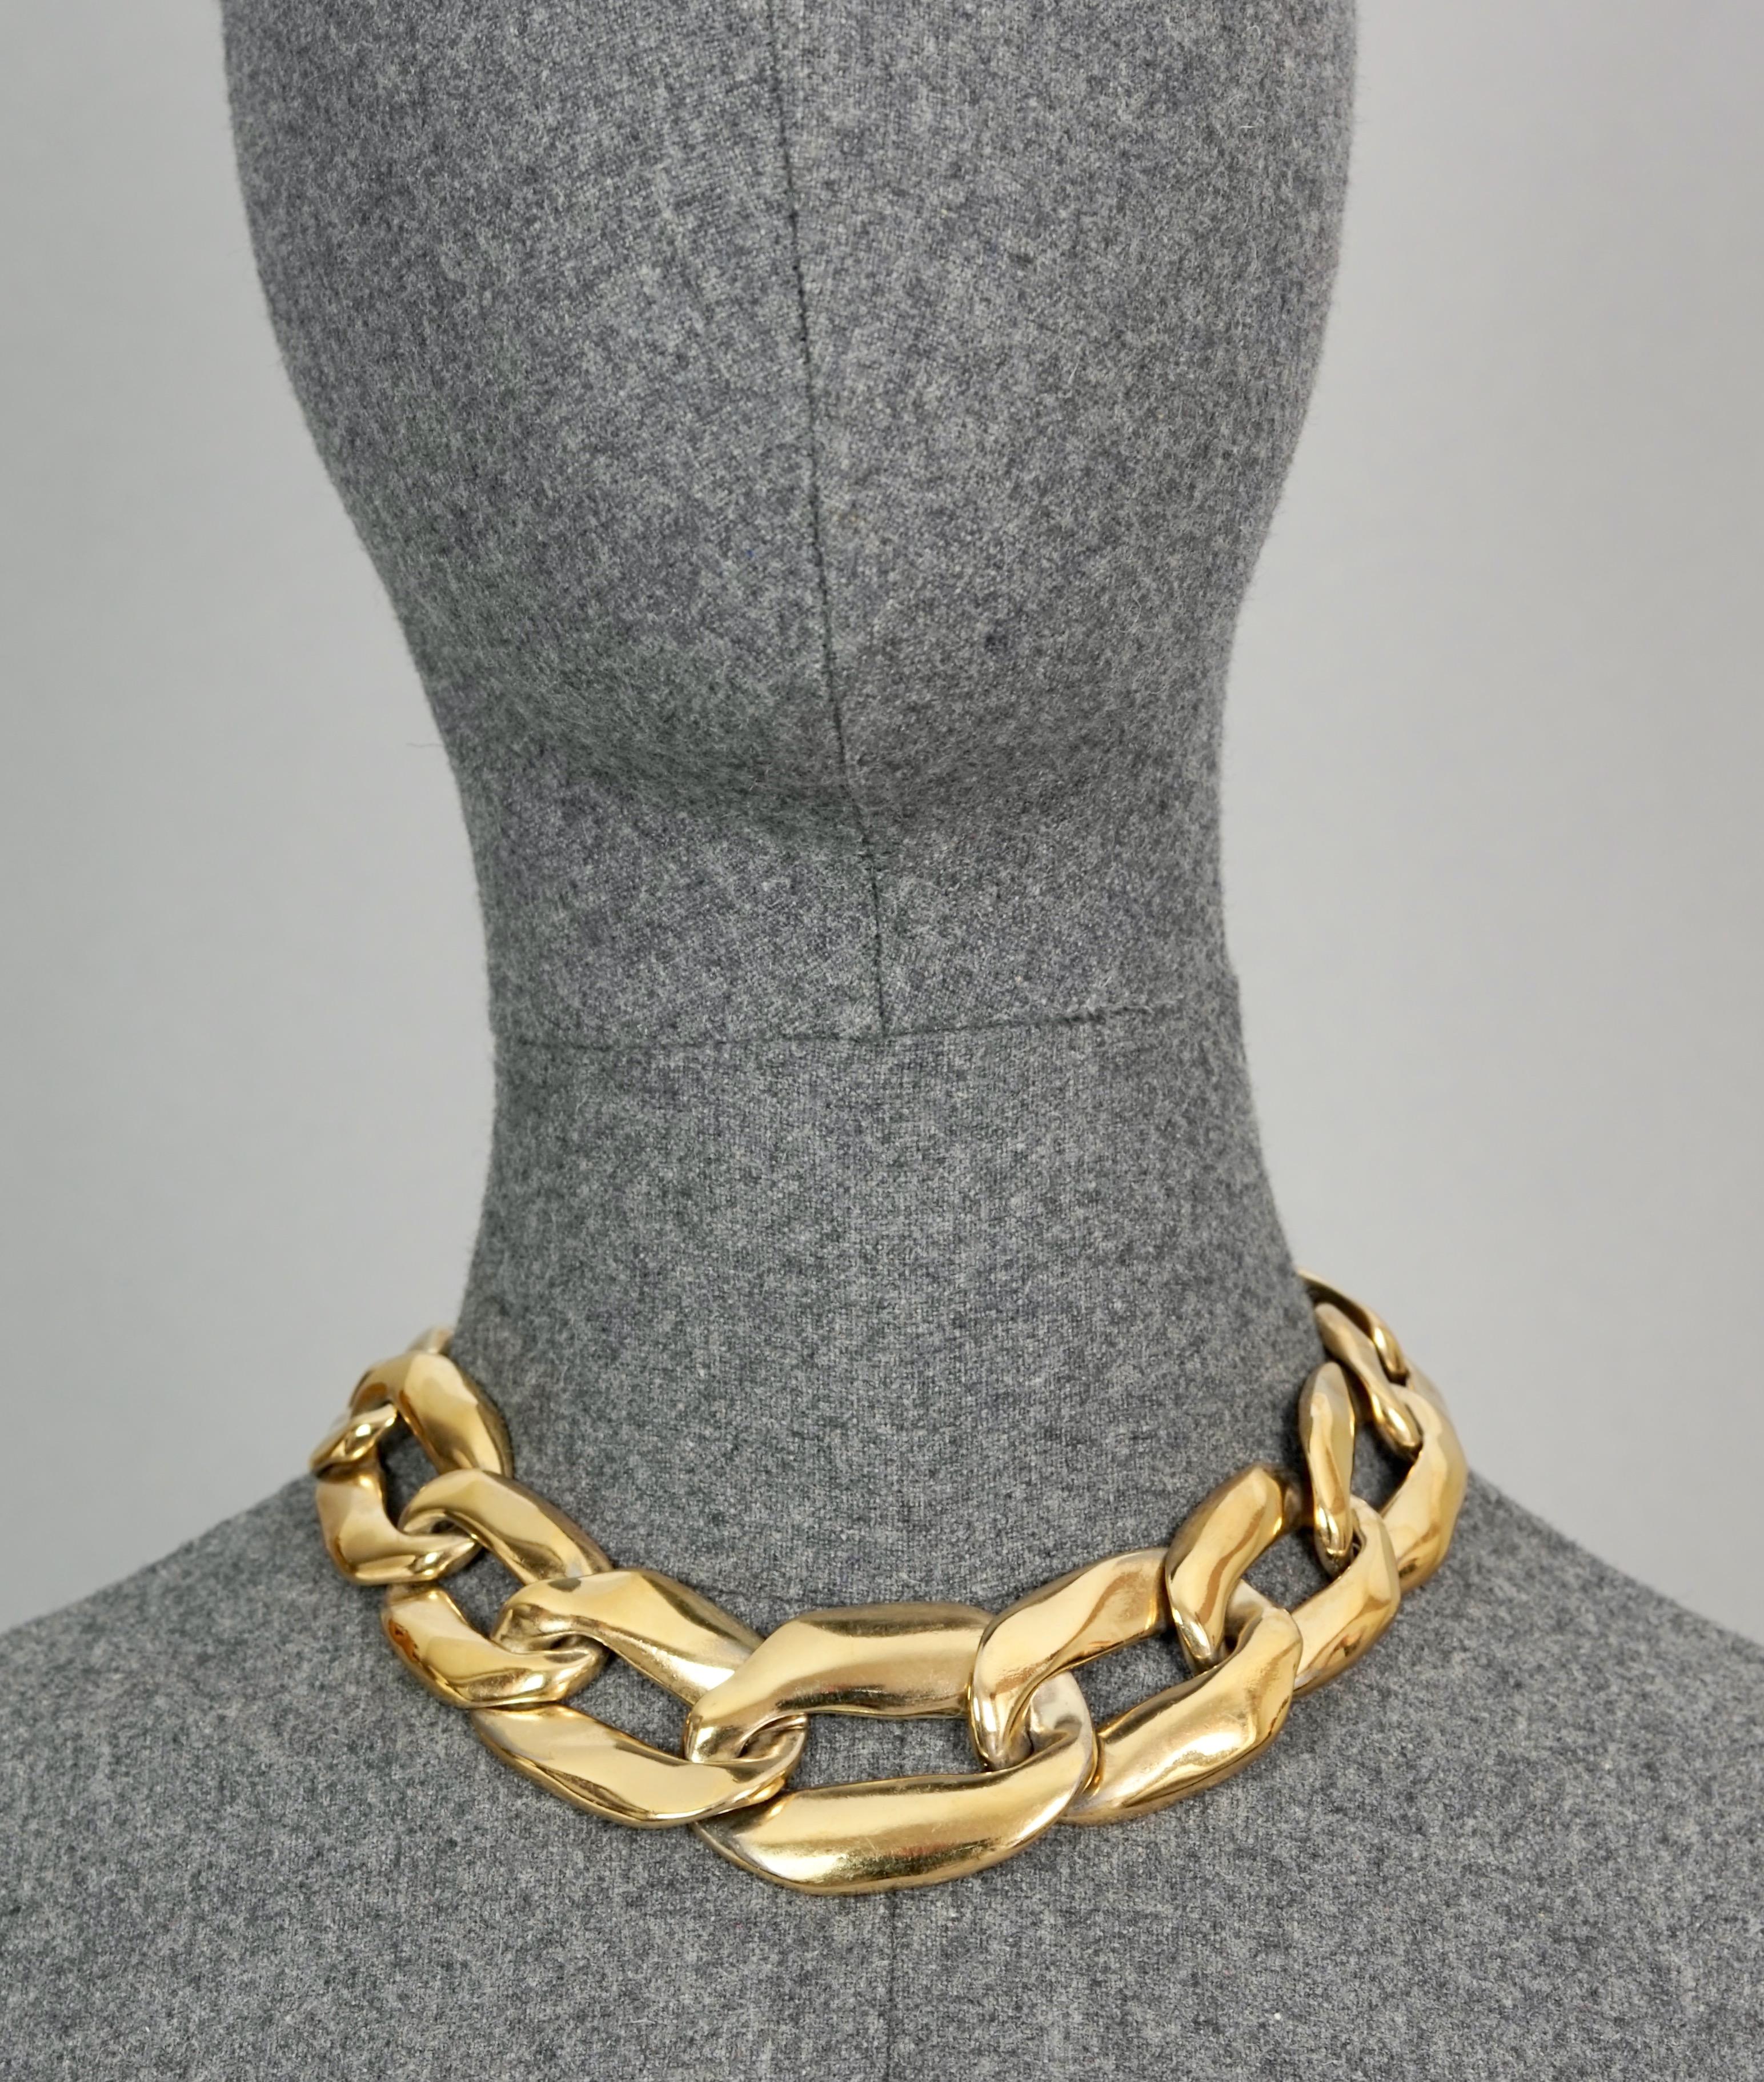 Vintage YVES SAINT LAURENT Ysl by Robert Goossens Chunky Chain Links Necklace

Measurements:
Height: 1.45 inches (3.7 cm)
Wearable Length: 16.92 inches (43 cm) to 19.29 inches (49 cm)

Features:
- 100% Authentic YVES SAINT LAURENT by Robert